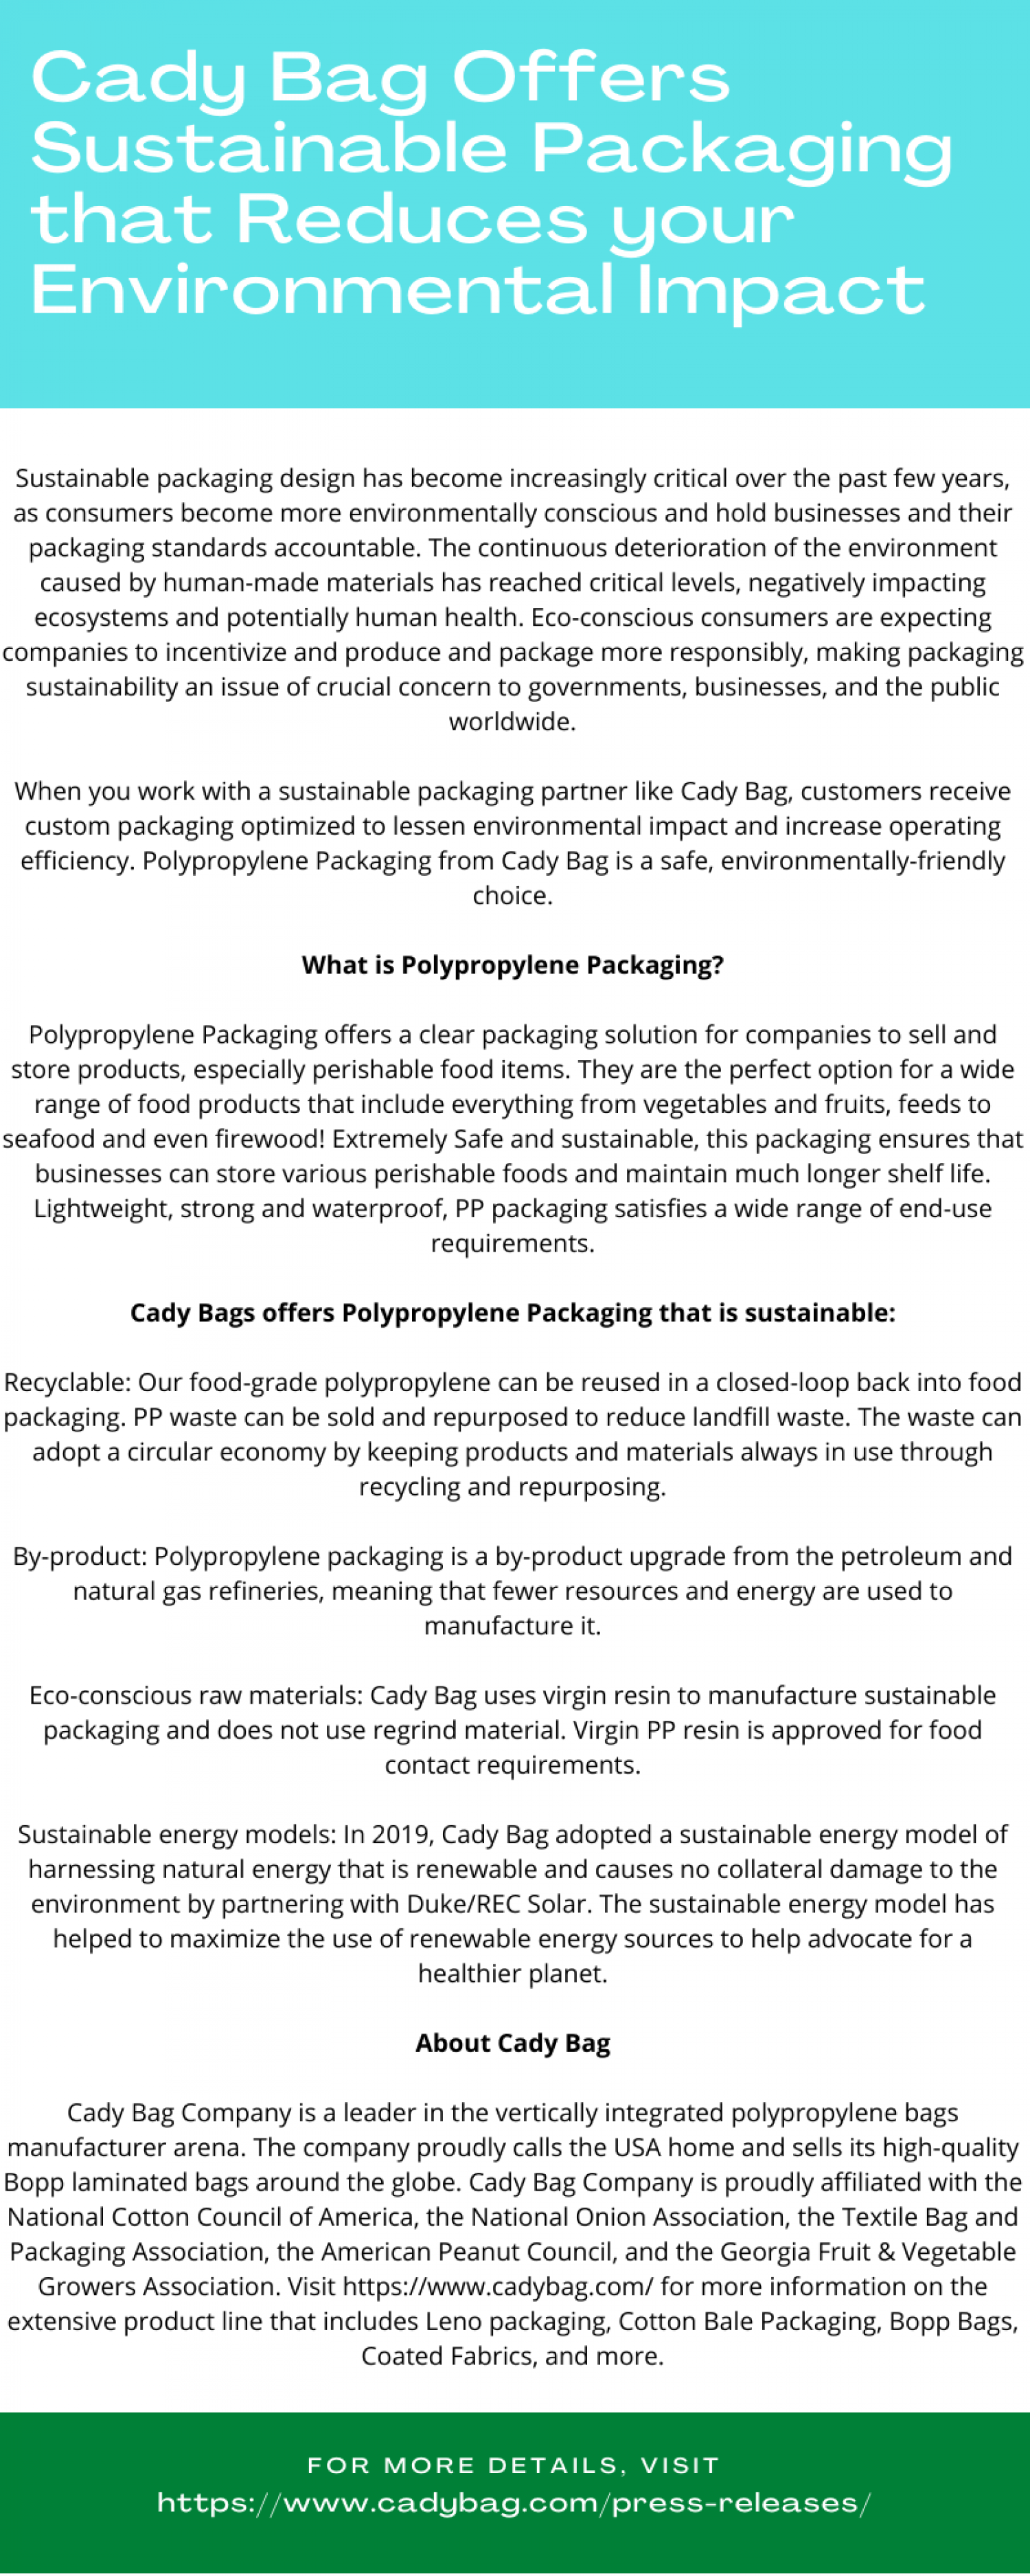 Cady Bag Offers Sustainable Packaging that Reduces your Environmental Impact Infographic